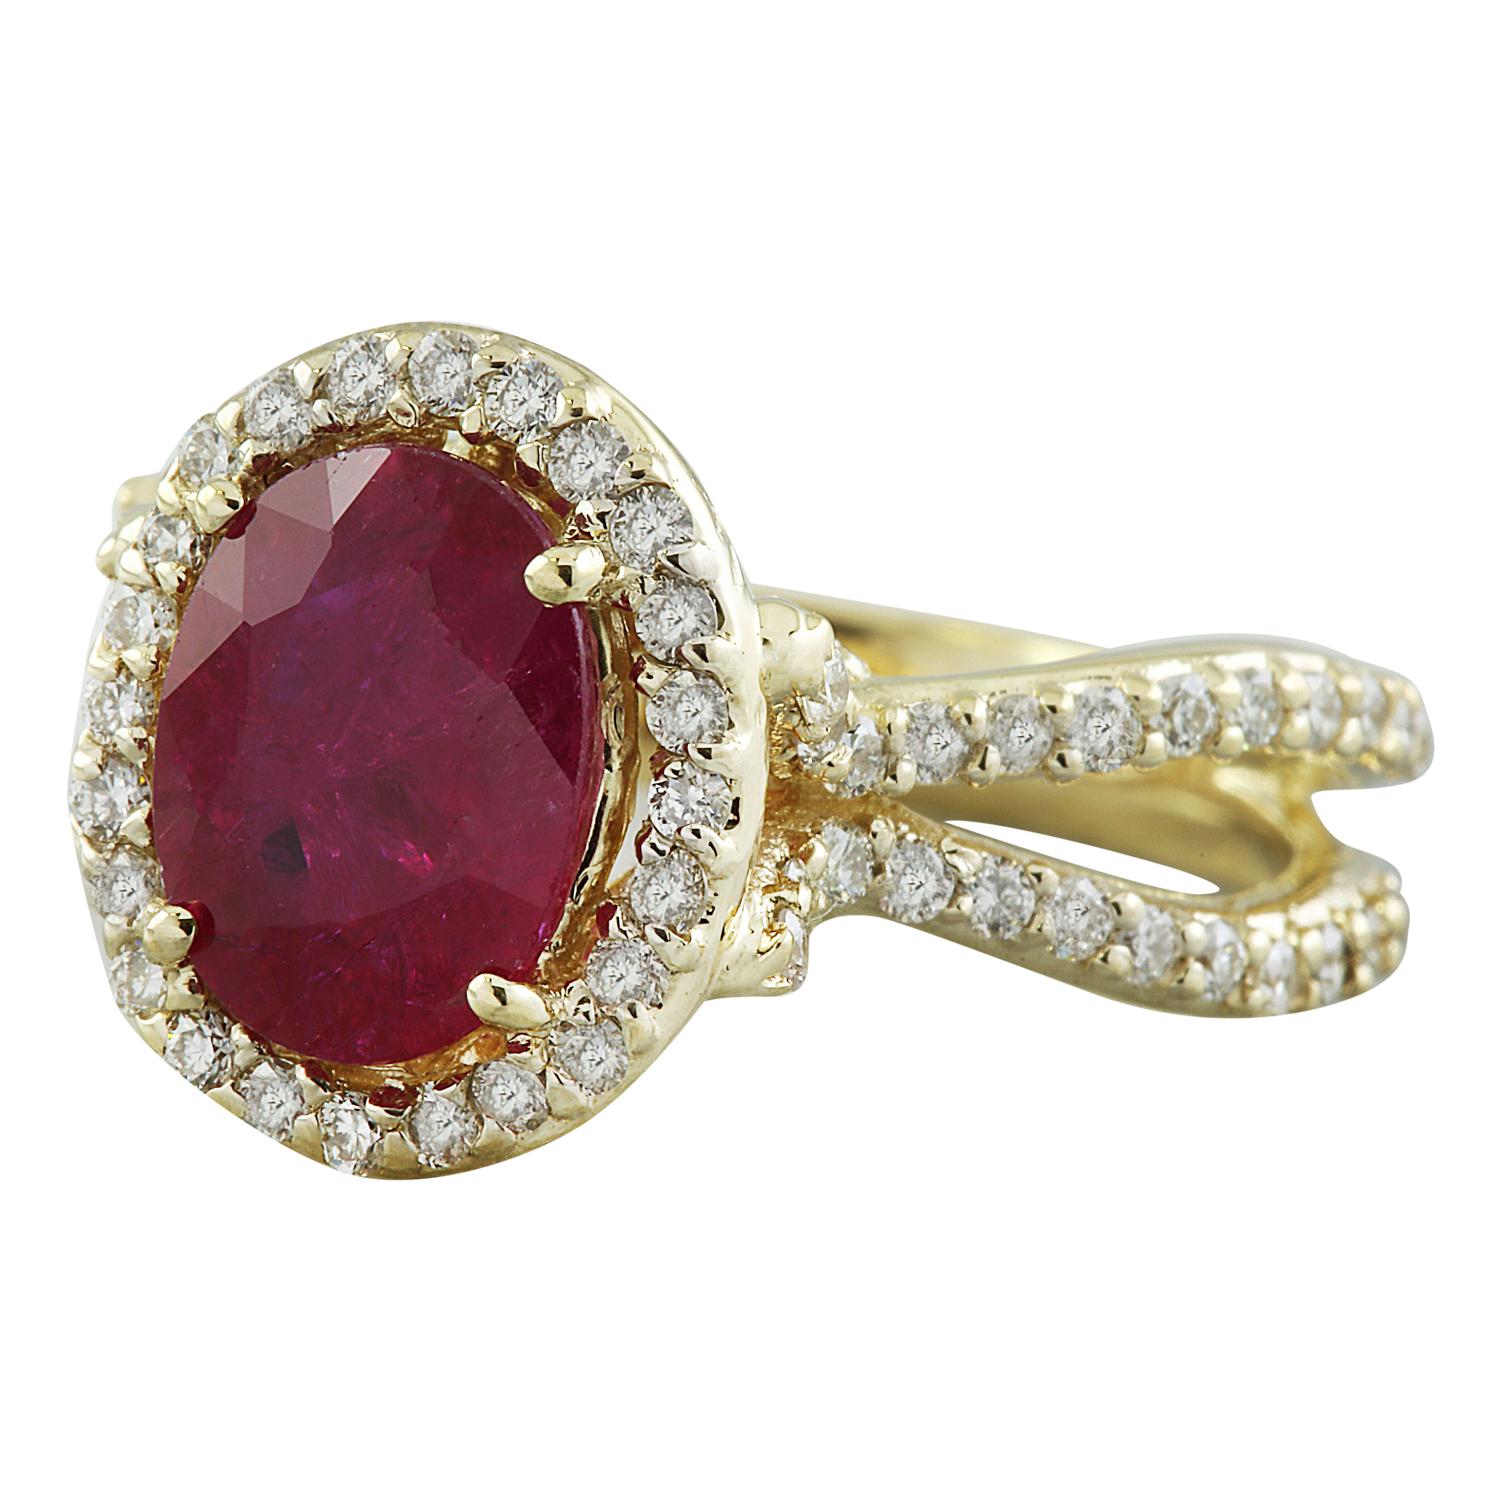 3.04 Carat Natural Ruby 14 Karat Solid Yellow Gold Diamond Ring
Stamped: 14K 
Total Ring Weight: 6 Grams 
Ruby Weight: 2.34 Carat (9.00x7.00 Millimeters) 
Diamond Weight: 0.70 carat (F-G Color, VS2-SI1 Clarity)
Quantity: 90
Face Measures: